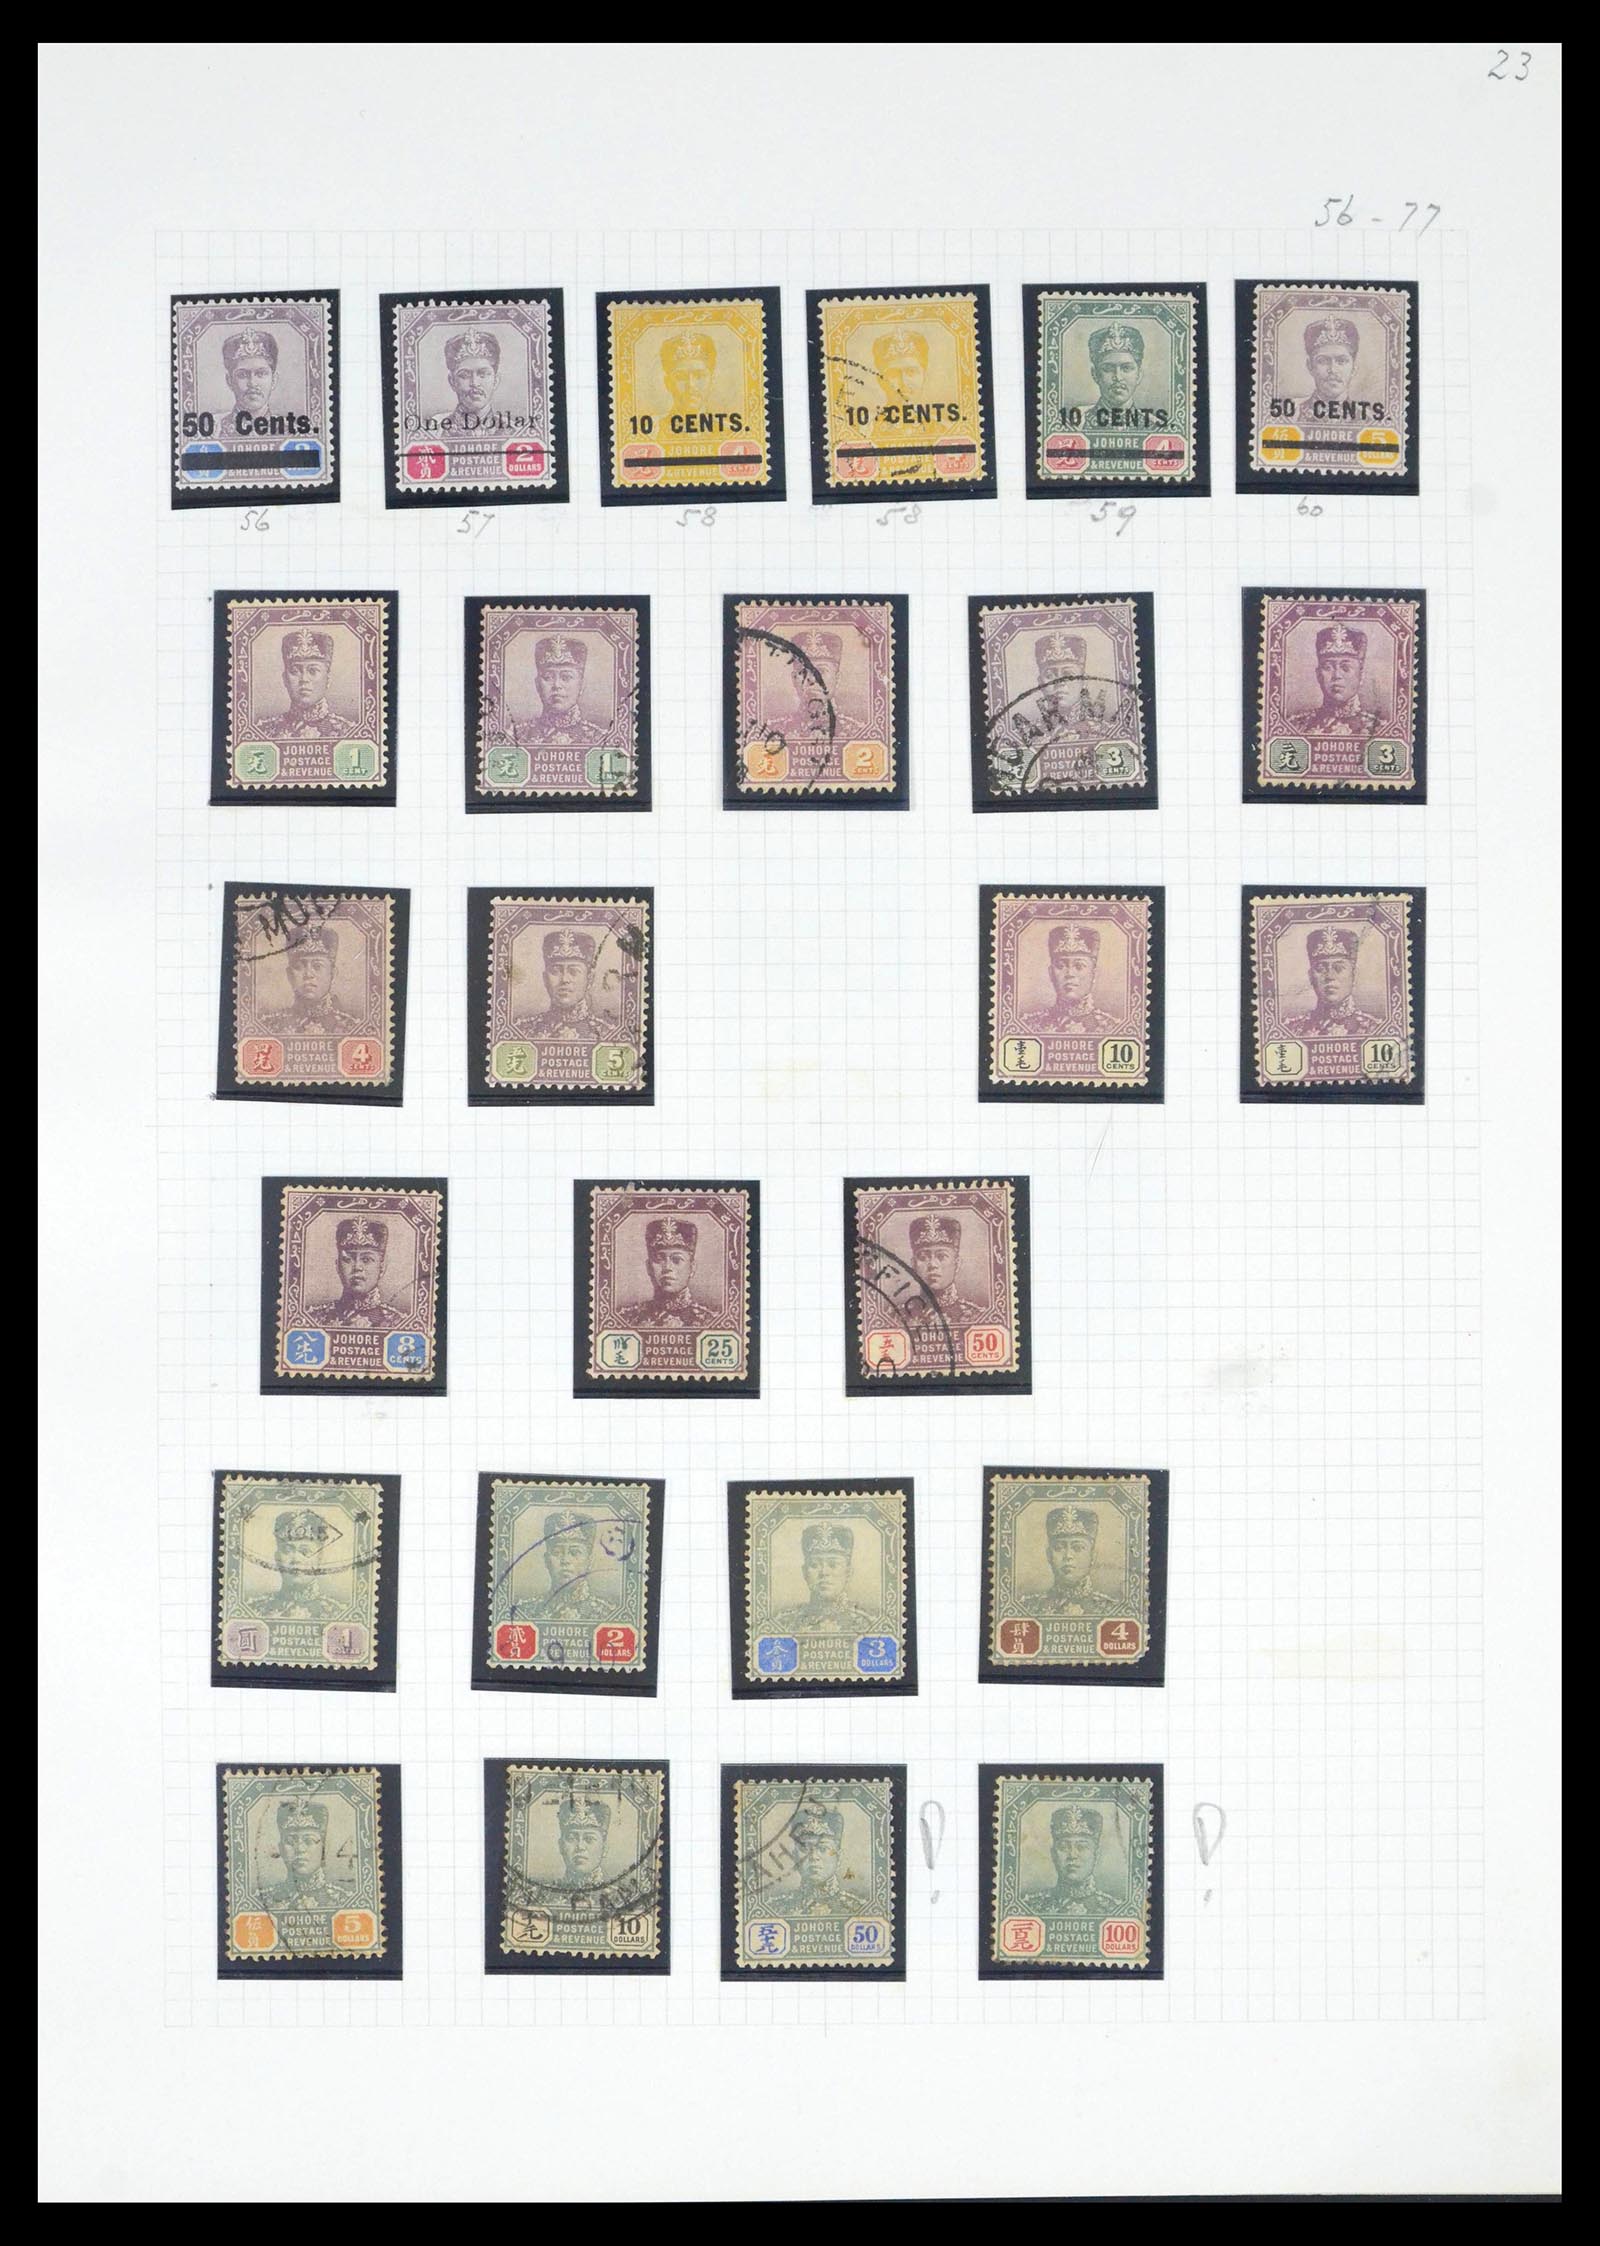 39470 0004 - Stamp collection 39470 Malayan States 1880-1965.